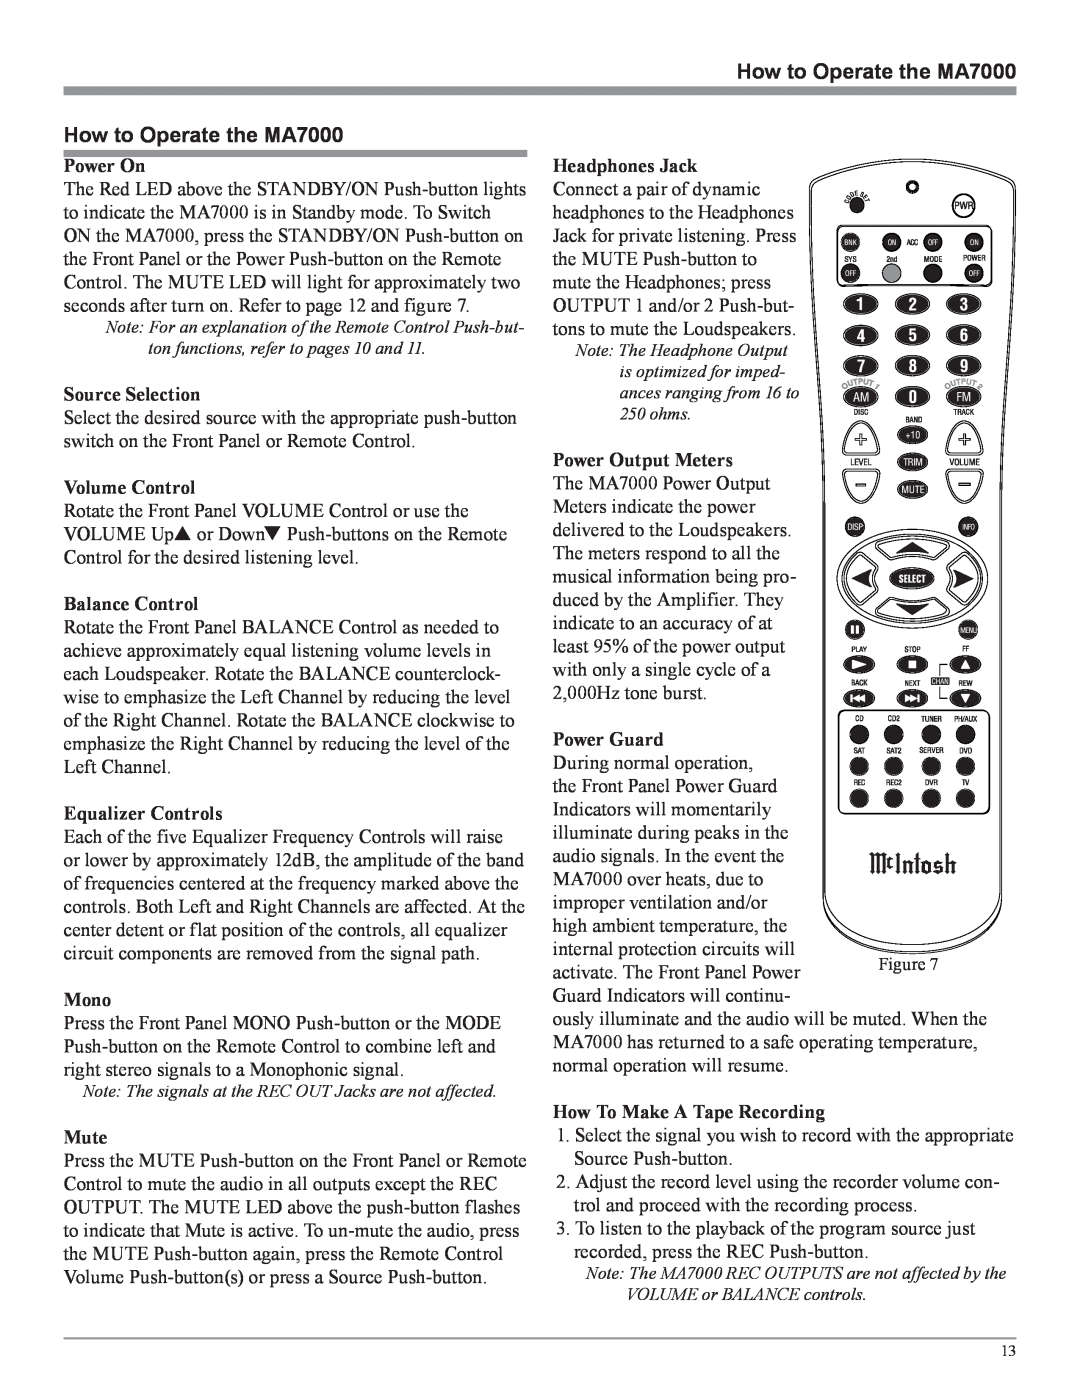 McIntosh owner manual How to Operate the MA7000 